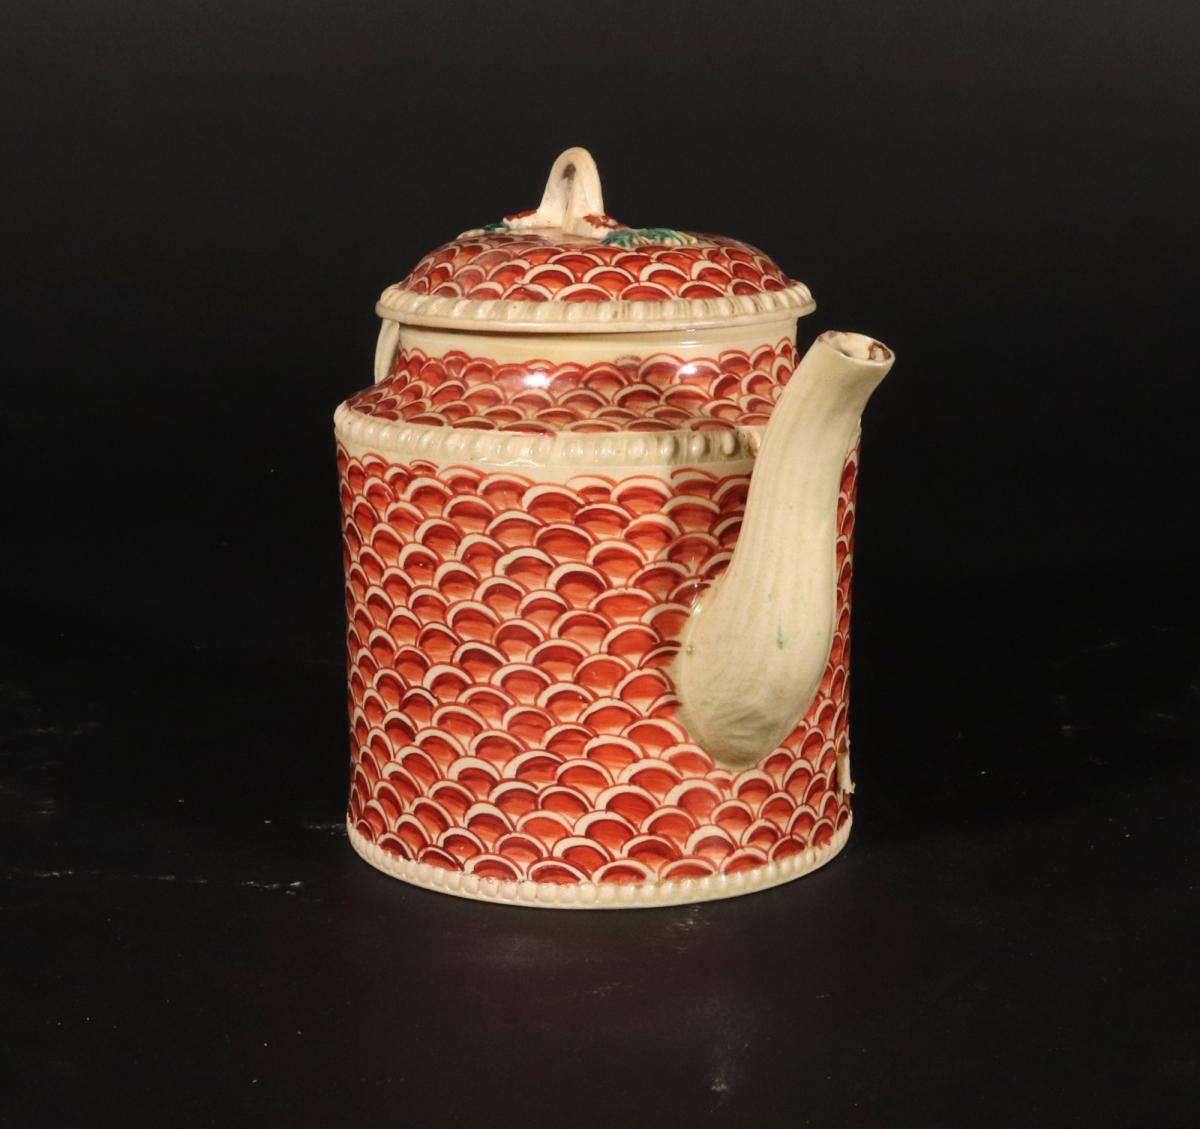 English Creamware Pottery Teapot and Cover with Rare Fish Scale Design